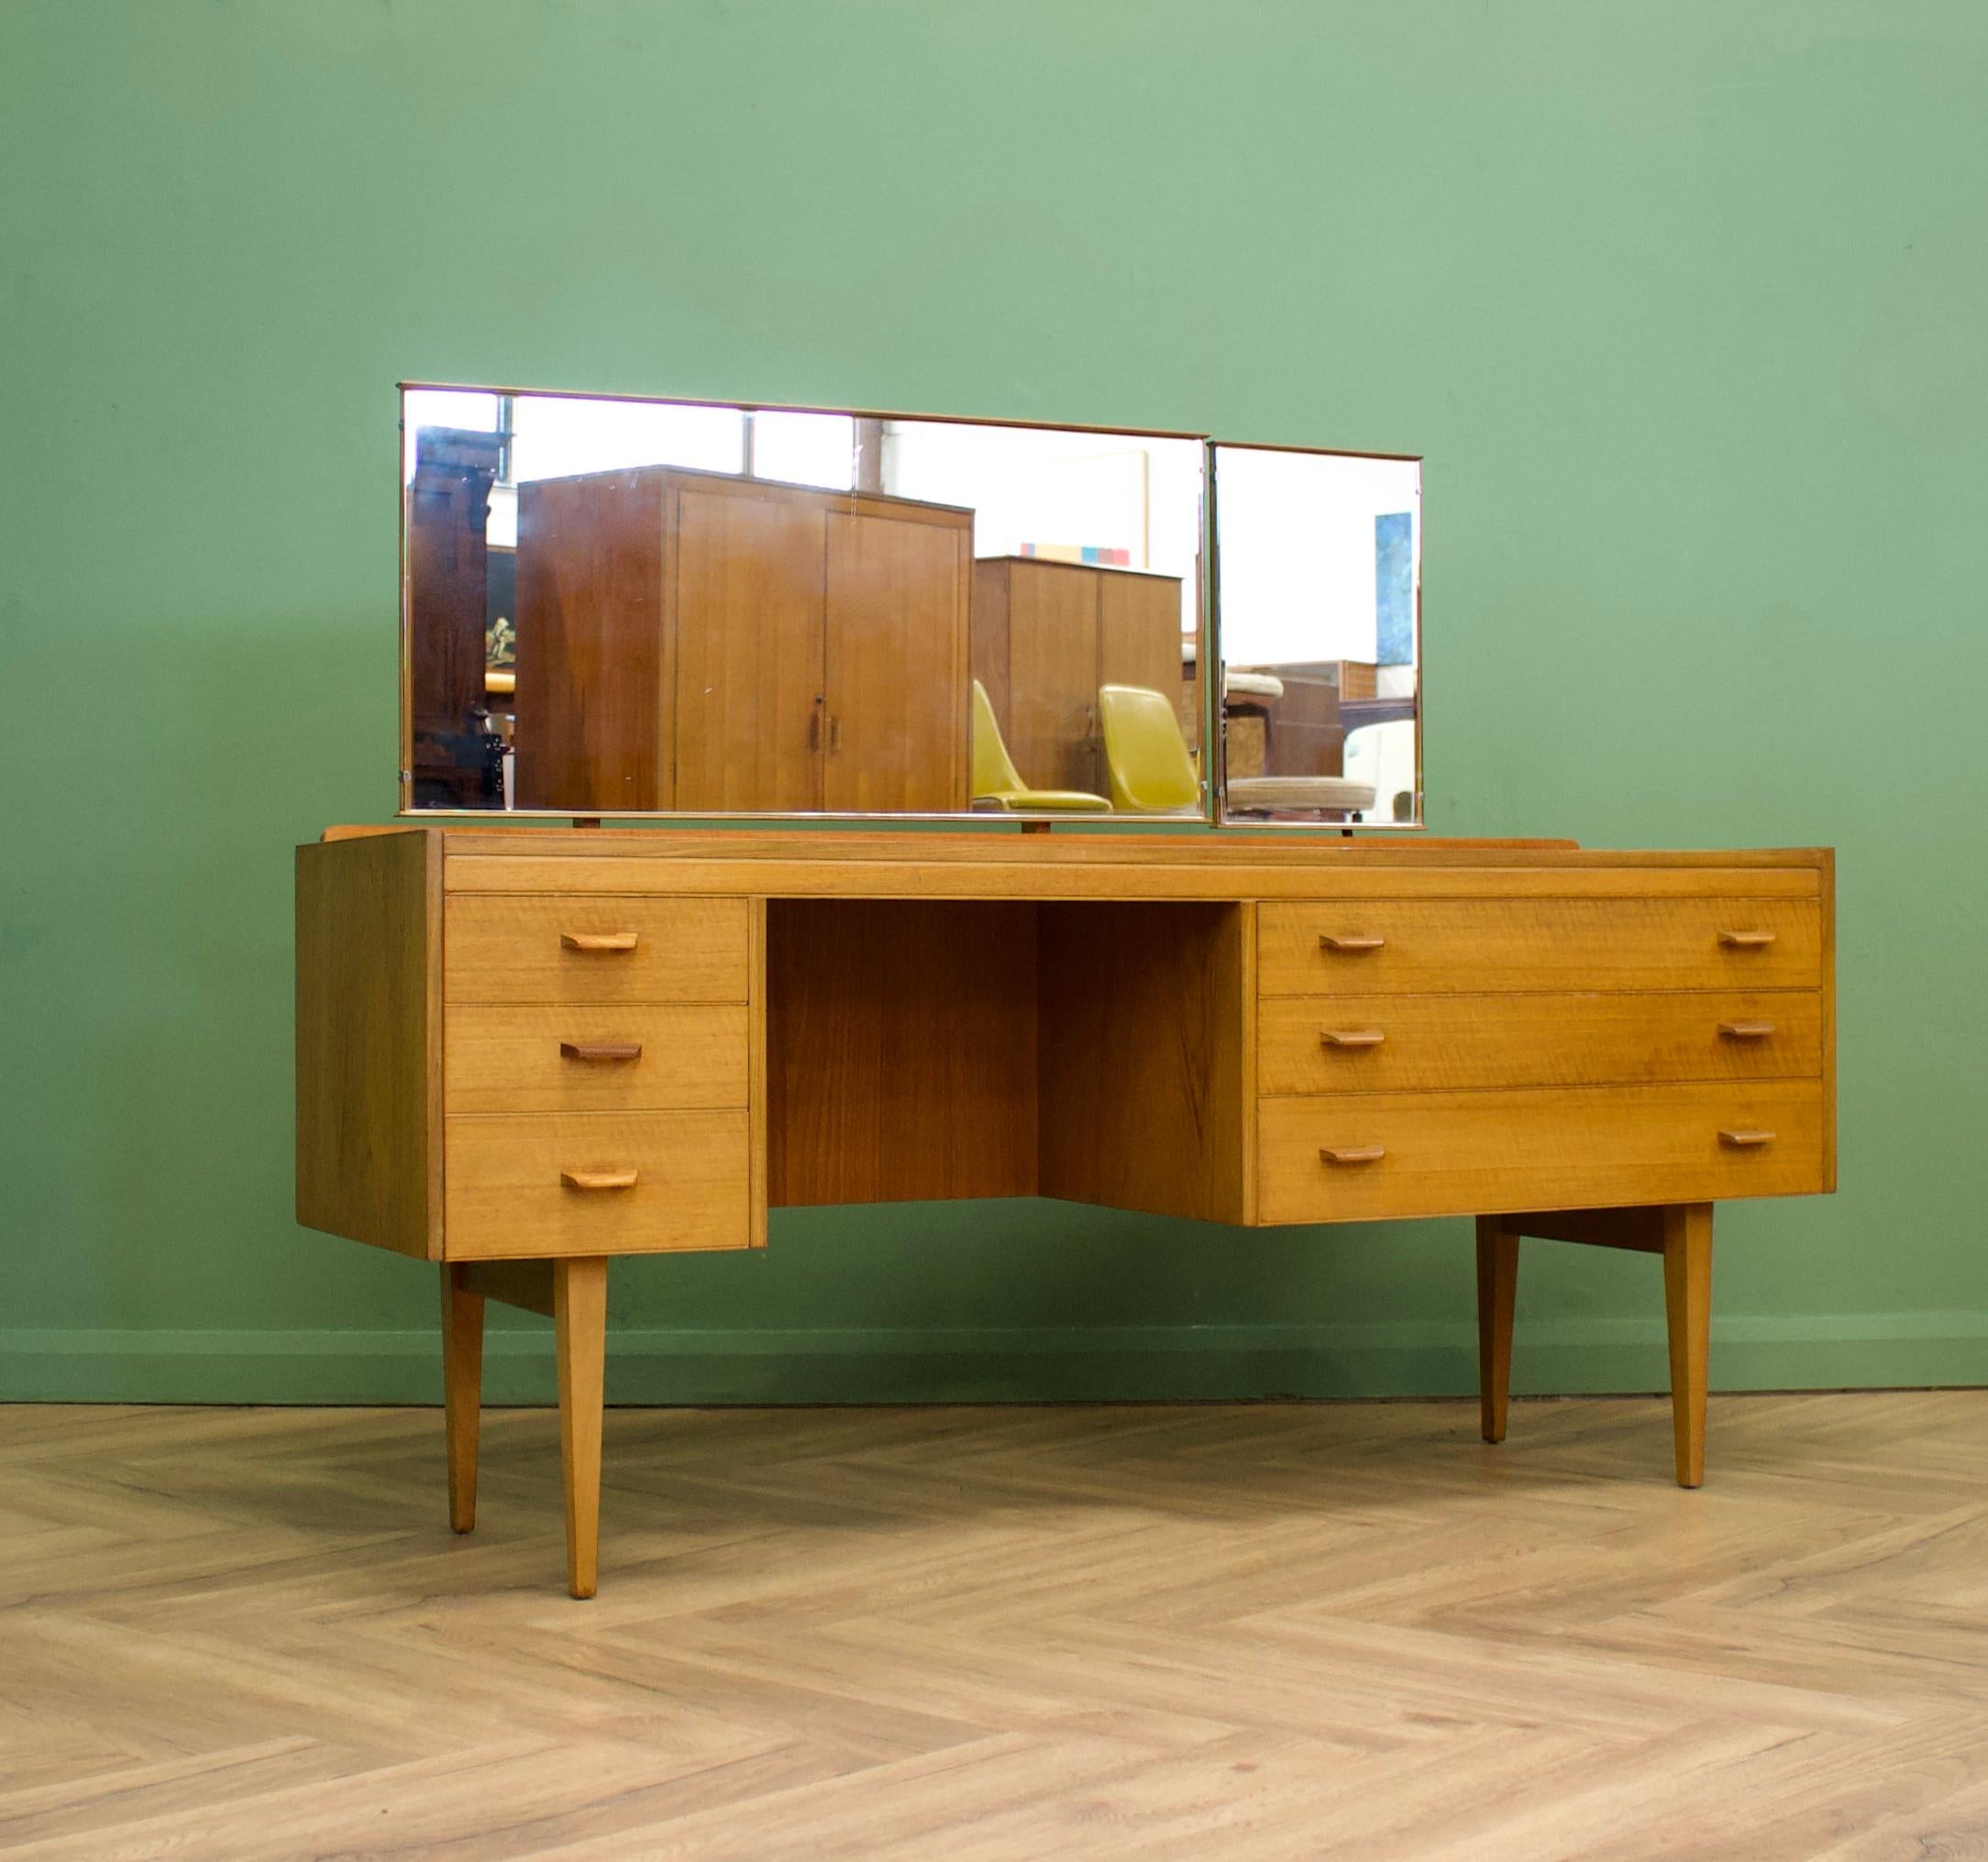 A beautiful quality walnut and teak dressing table by Alfred Cox - these pieces were usually retailed through Heals department store during the 1950s and 1960s
Featuring six drawers, with solid wood handles
The stylish legs are slightly tapered and